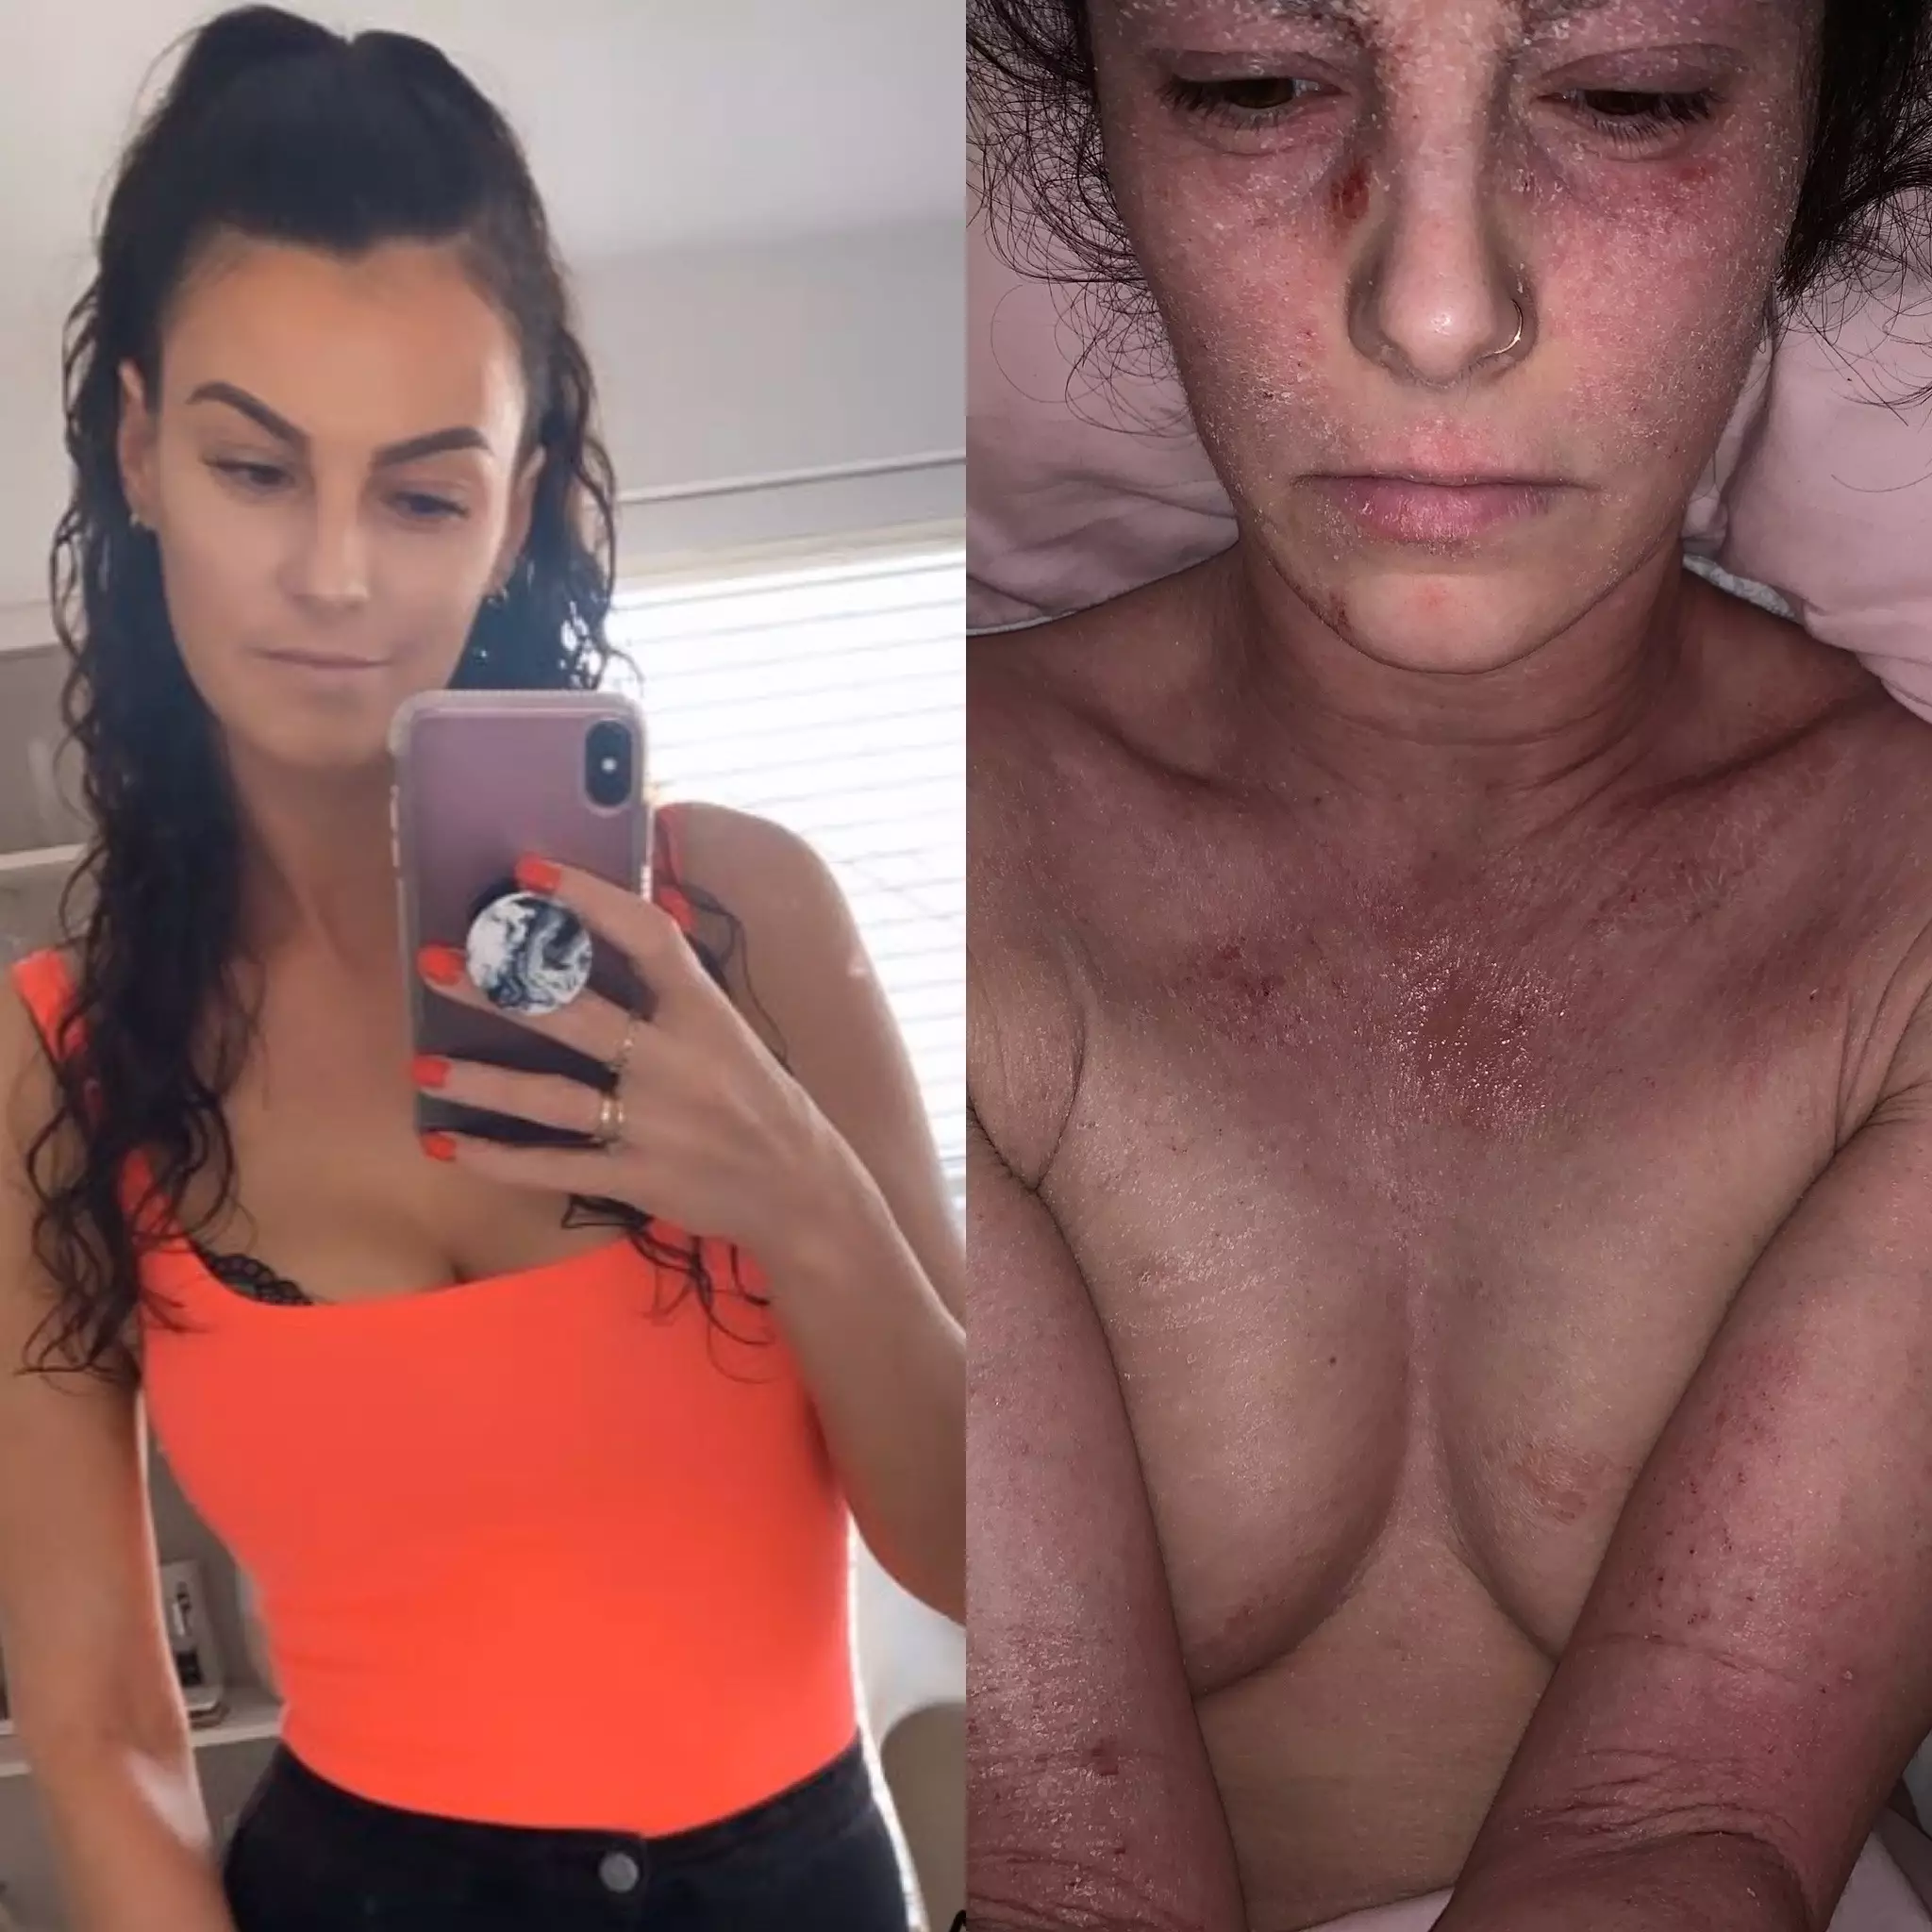 Stephanie is currently going through TSW, where she has cut out all steroids, beauty products and makeup (